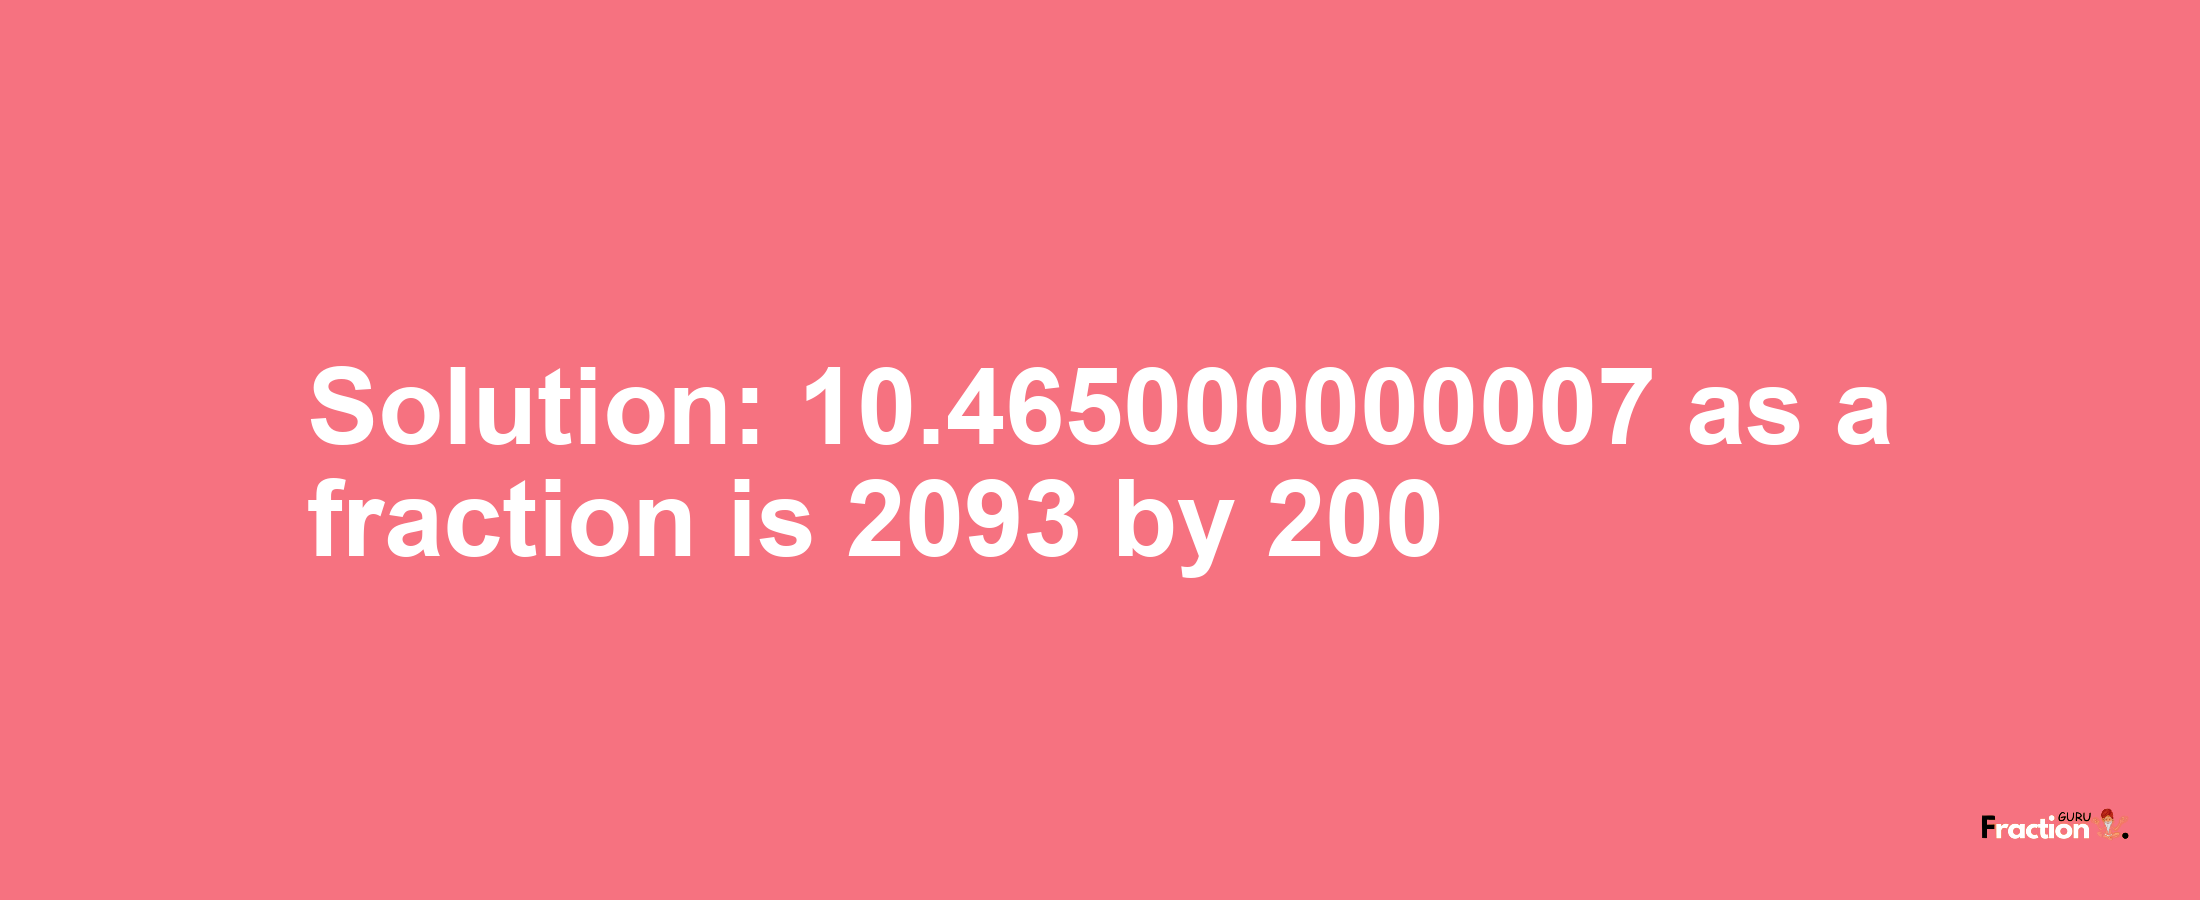 Solution:10.465000000007 as a fraction is 2093/200